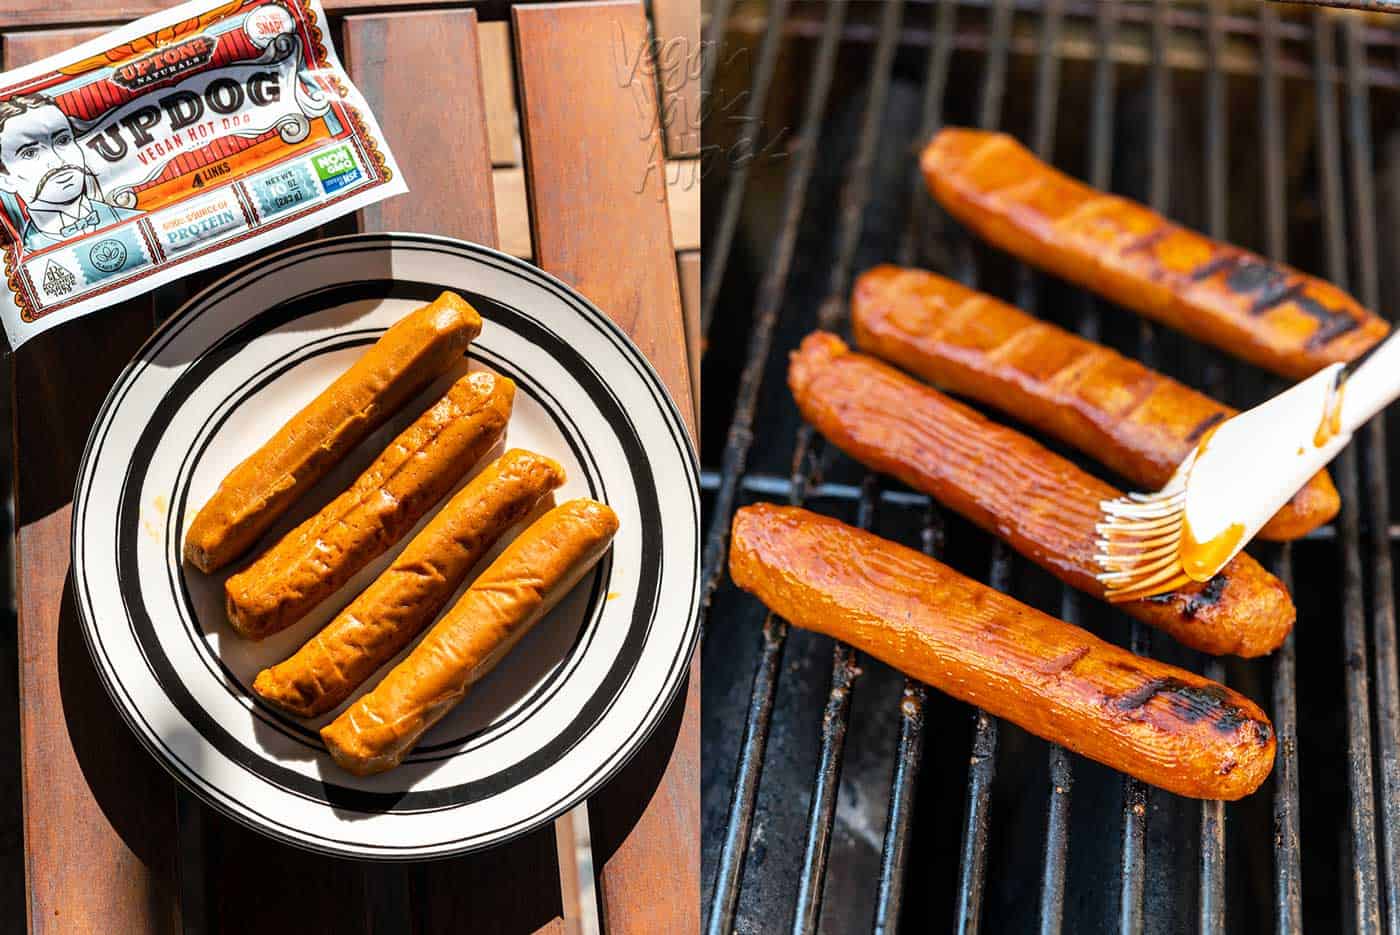 Image collage of vegan updogs on a plate and on the grill